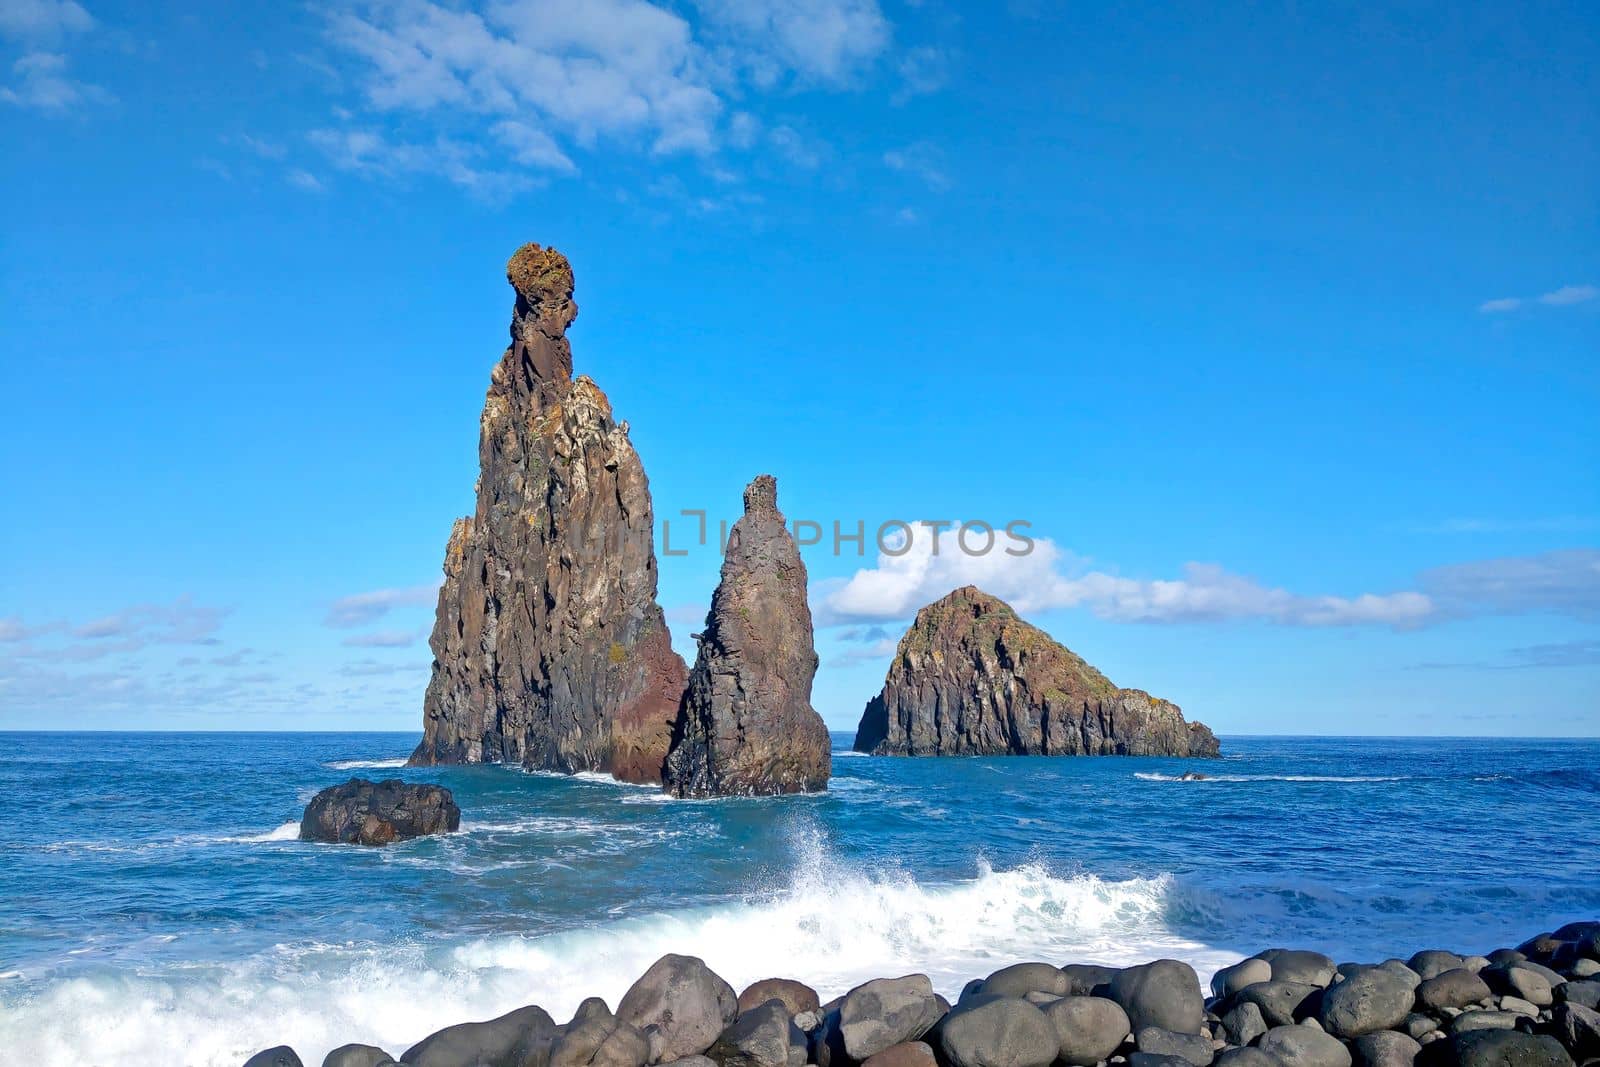 View of the rocks in the water. The waves of the sea or ocean wash the rocks